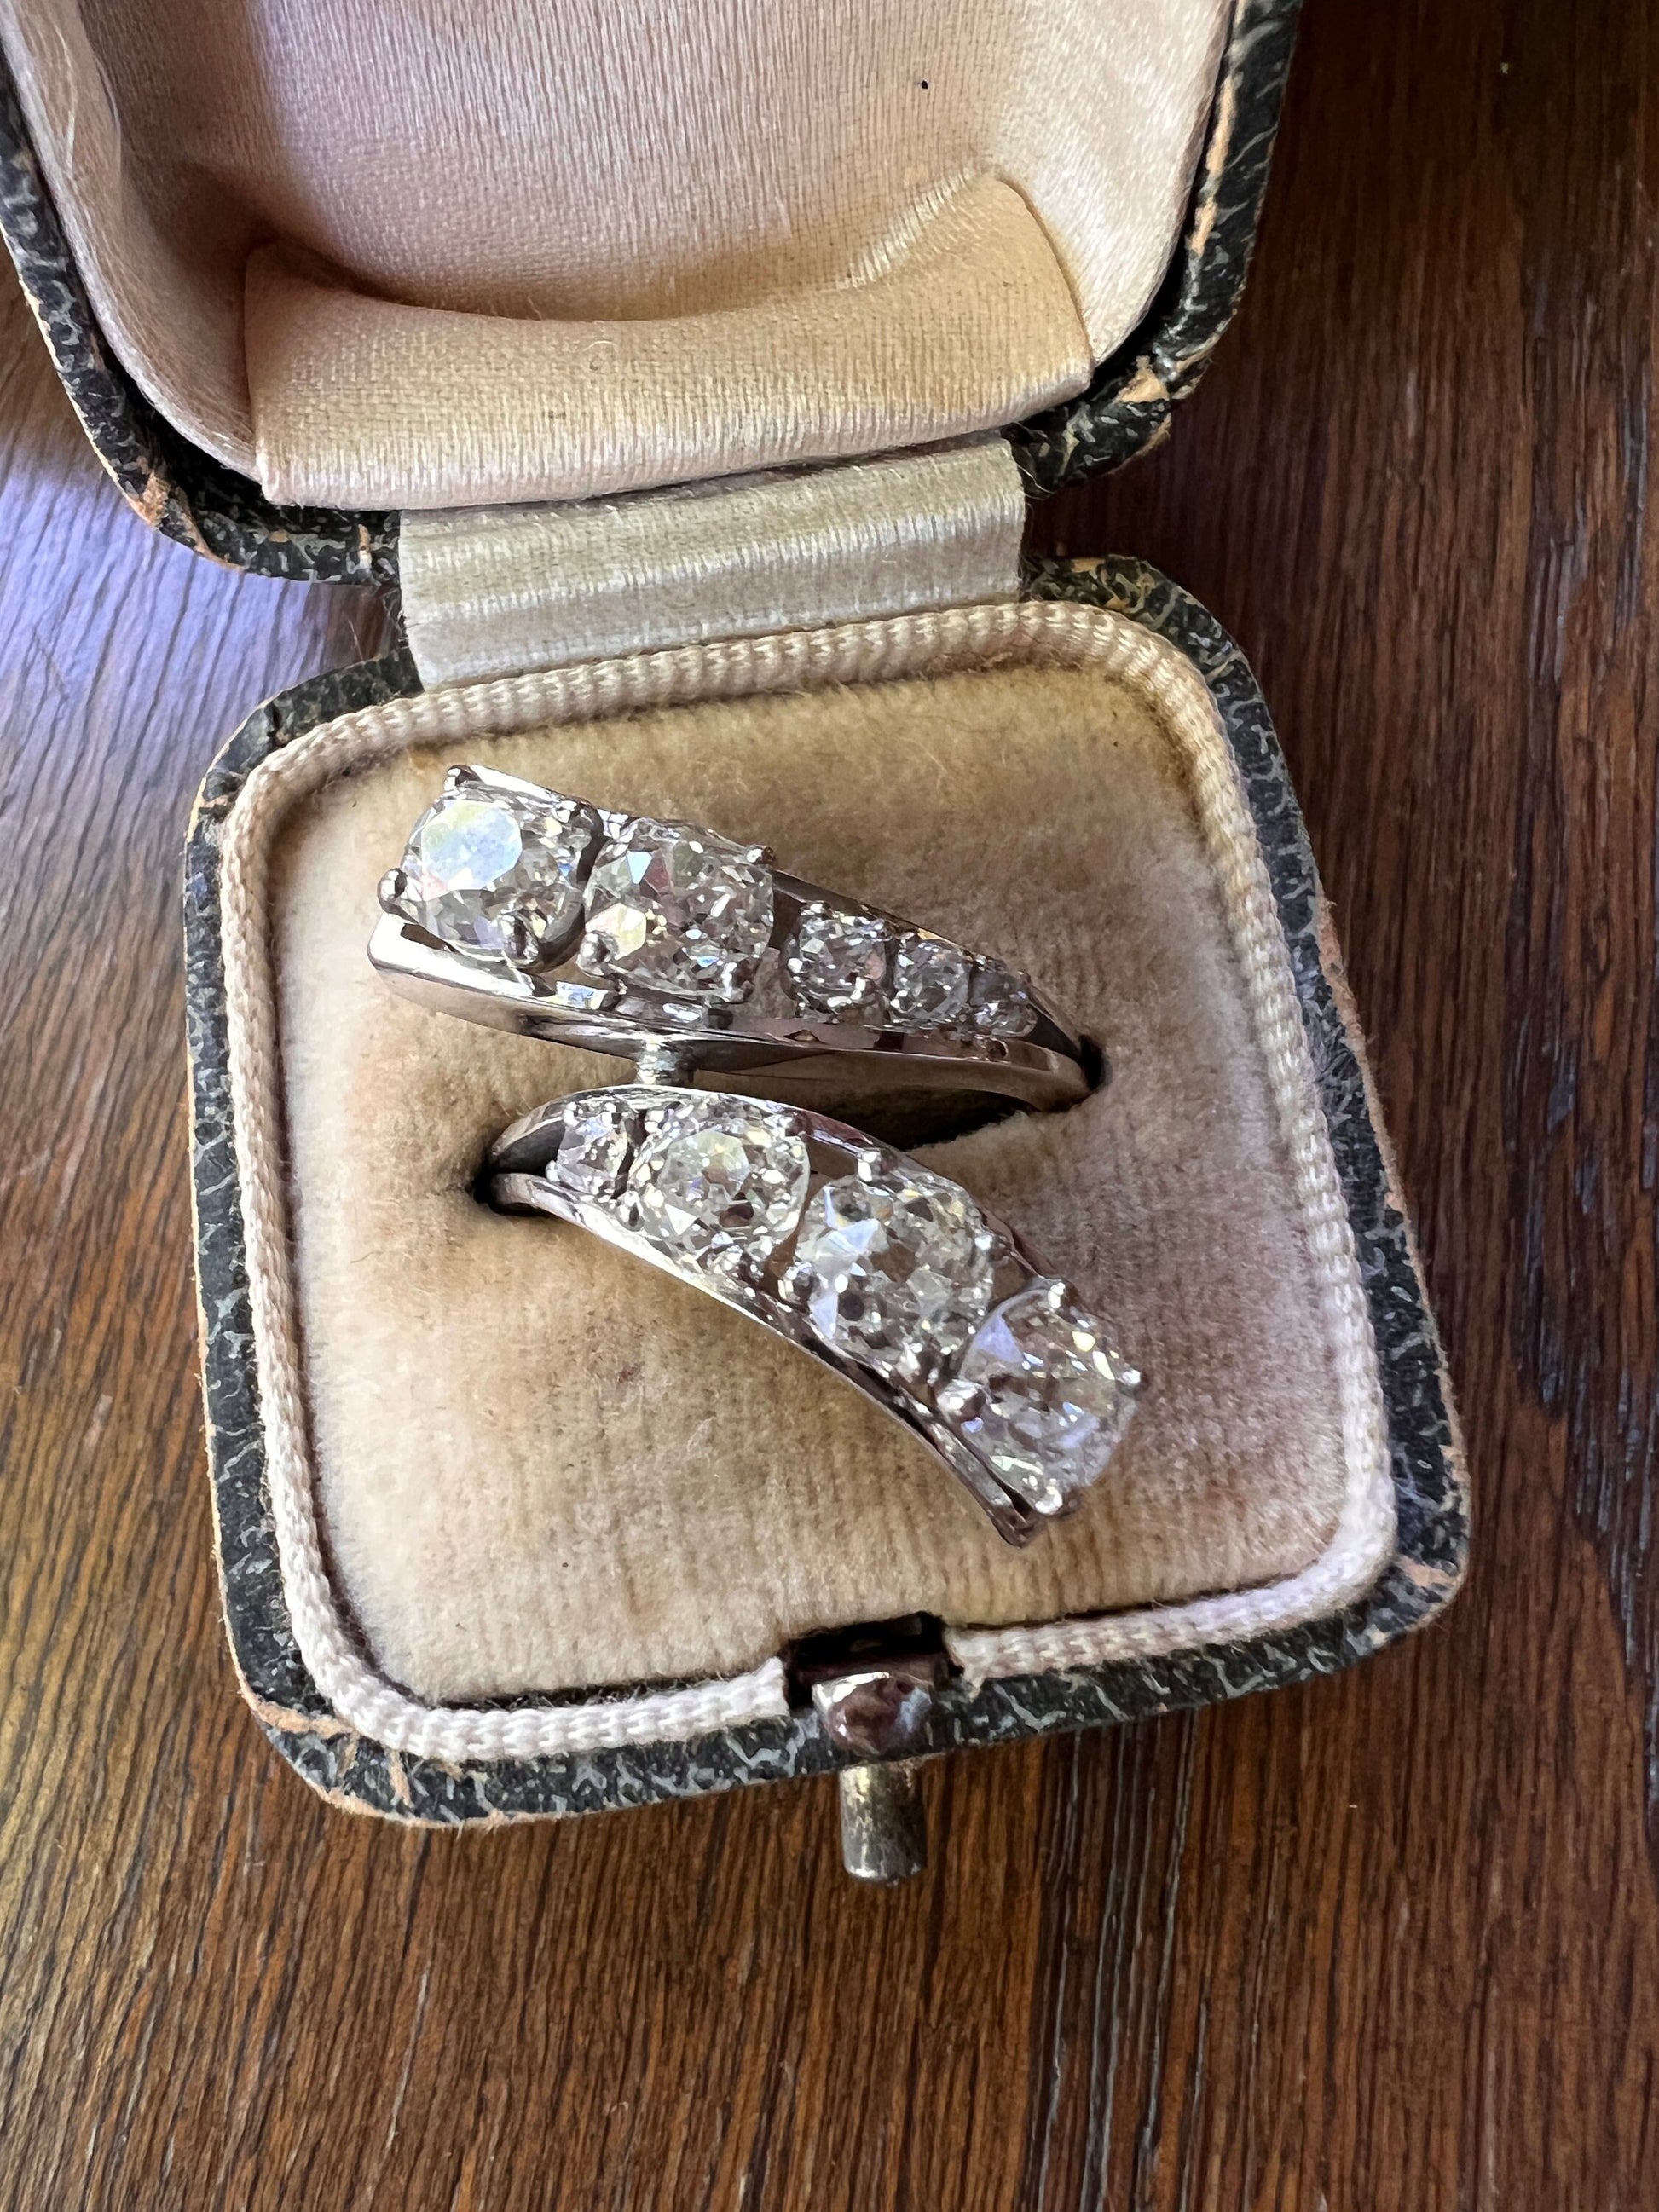 XL French Antique 3 CARATS CHUNKY Old Mine Cut Diamond Ring with Box Bypass 18k White Gold Art Deco Belle Epoque 3Ctw Sparkle OmC Ooak Stack